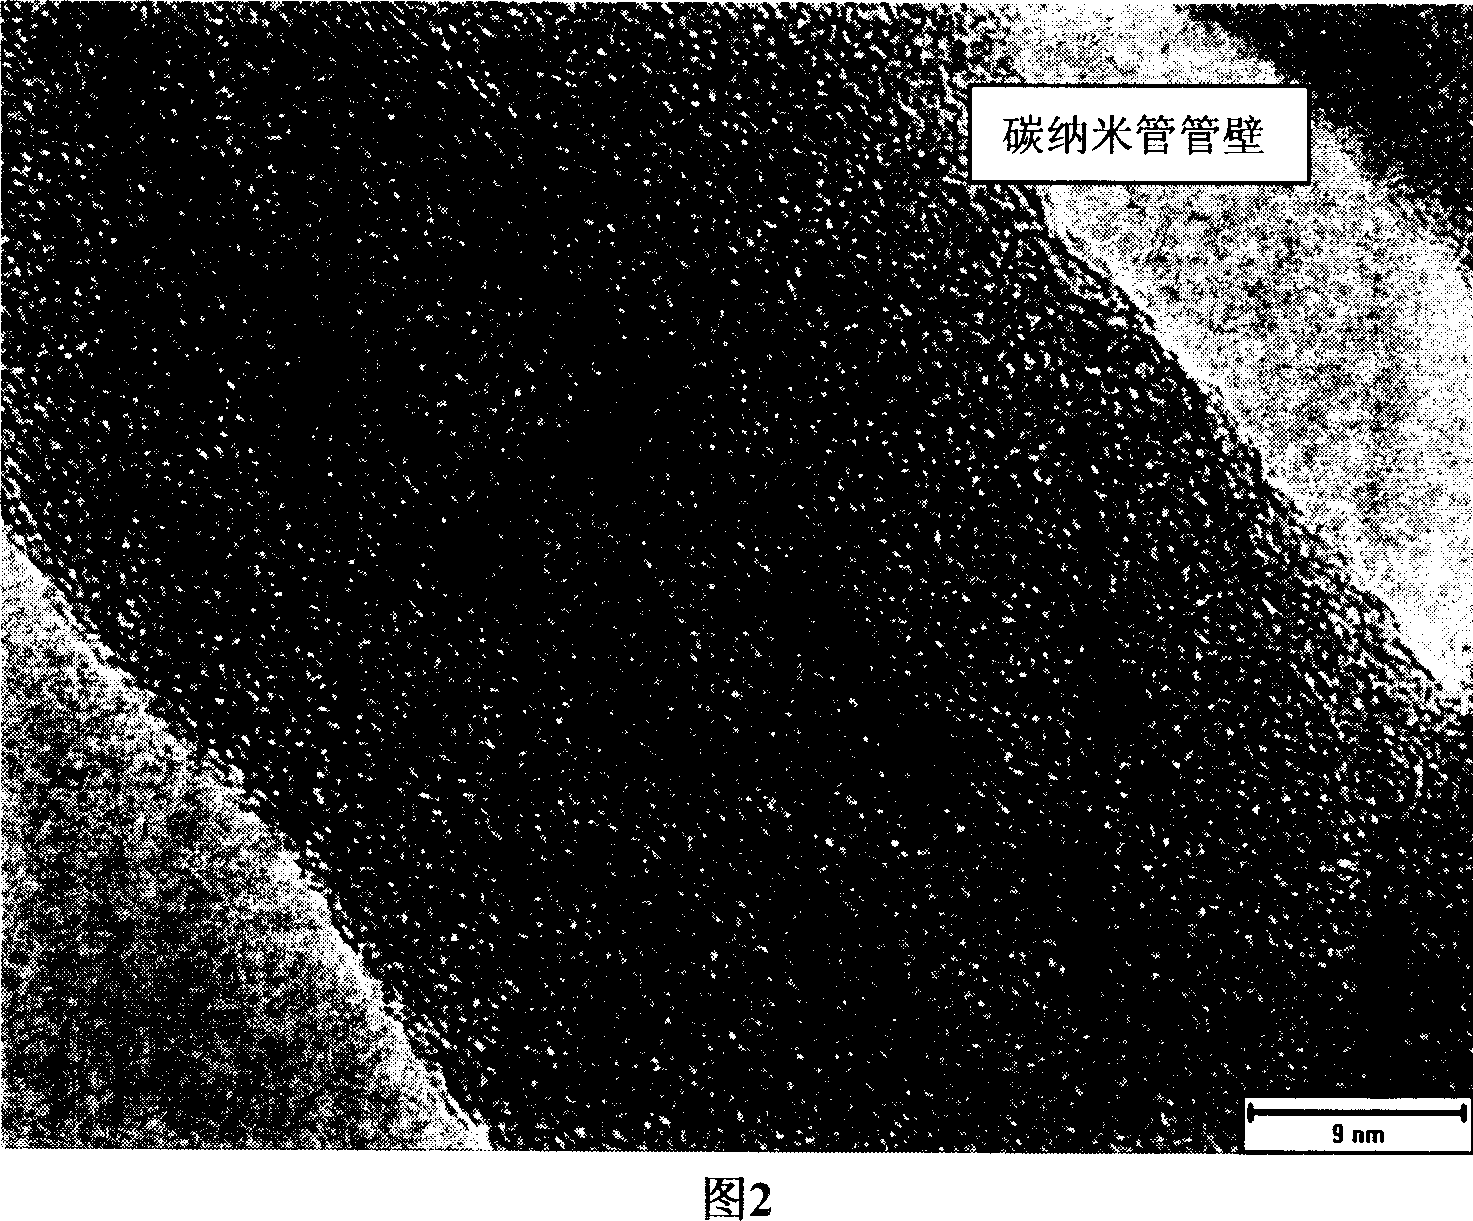 Method of preparing polythiophene or derivative thereof-multiwall carbon nano-tube composite material